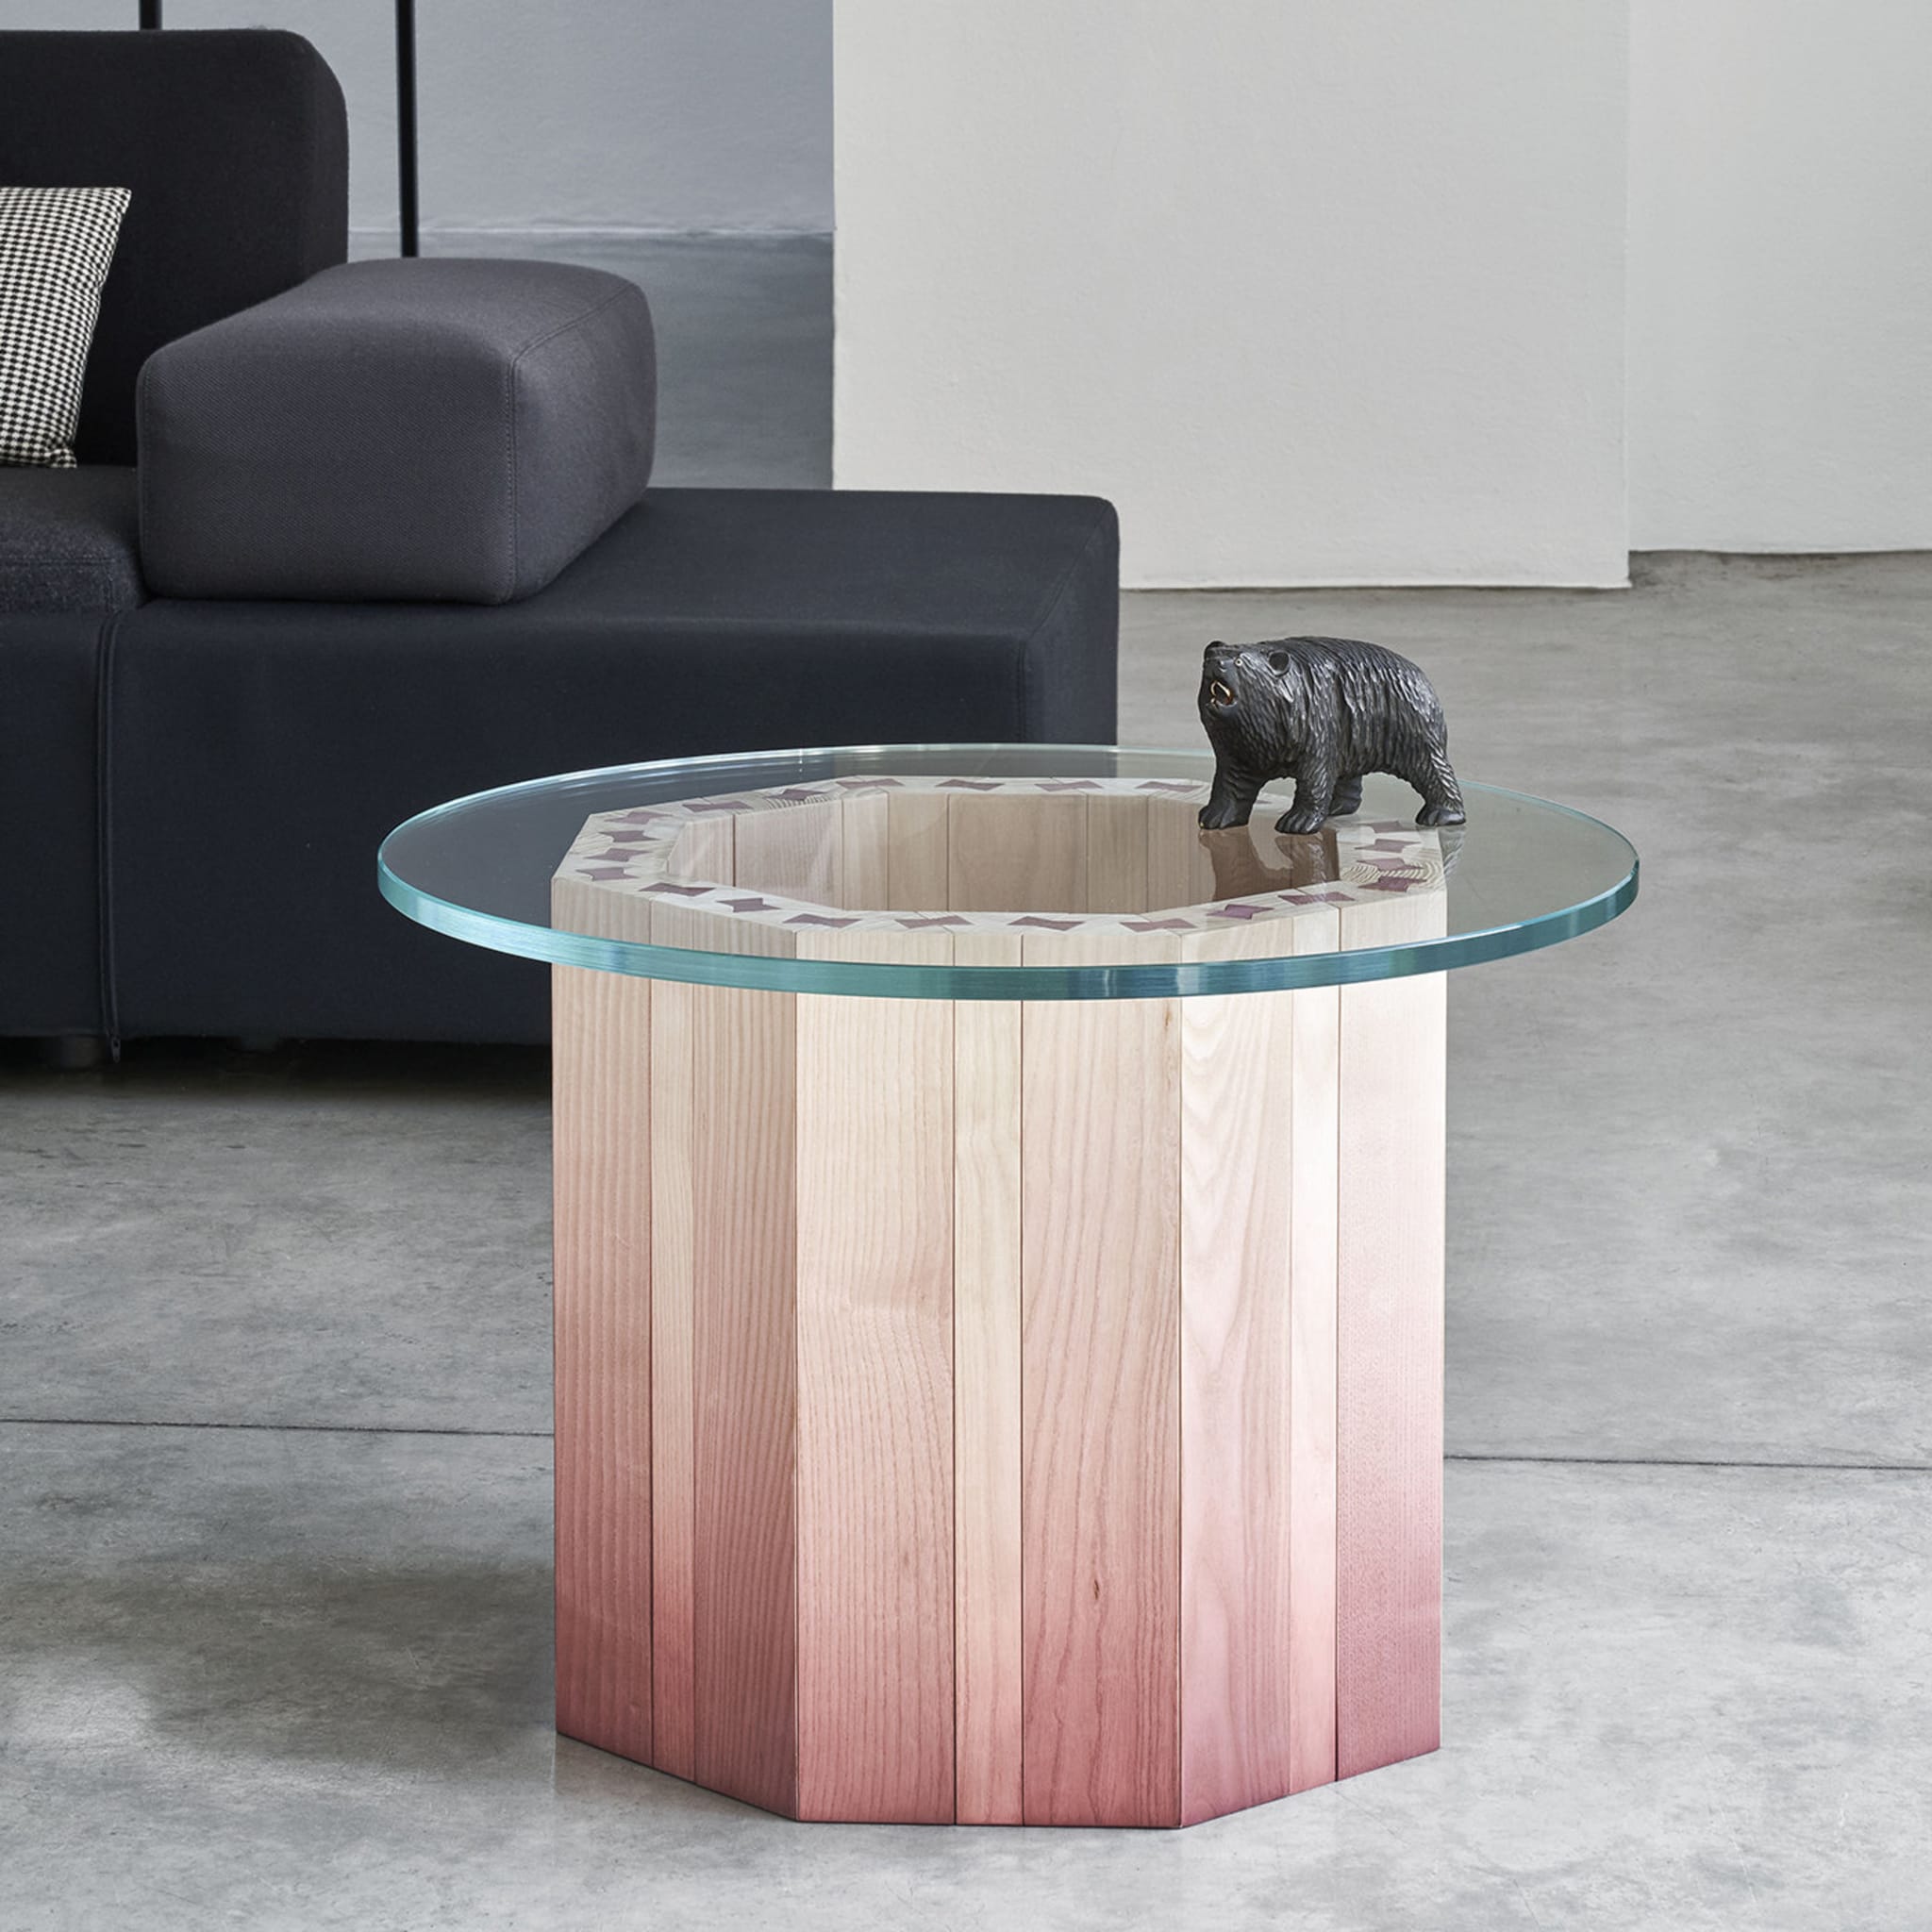 Swallow Coffee Table by Francesco Citterio - Alternative view 2